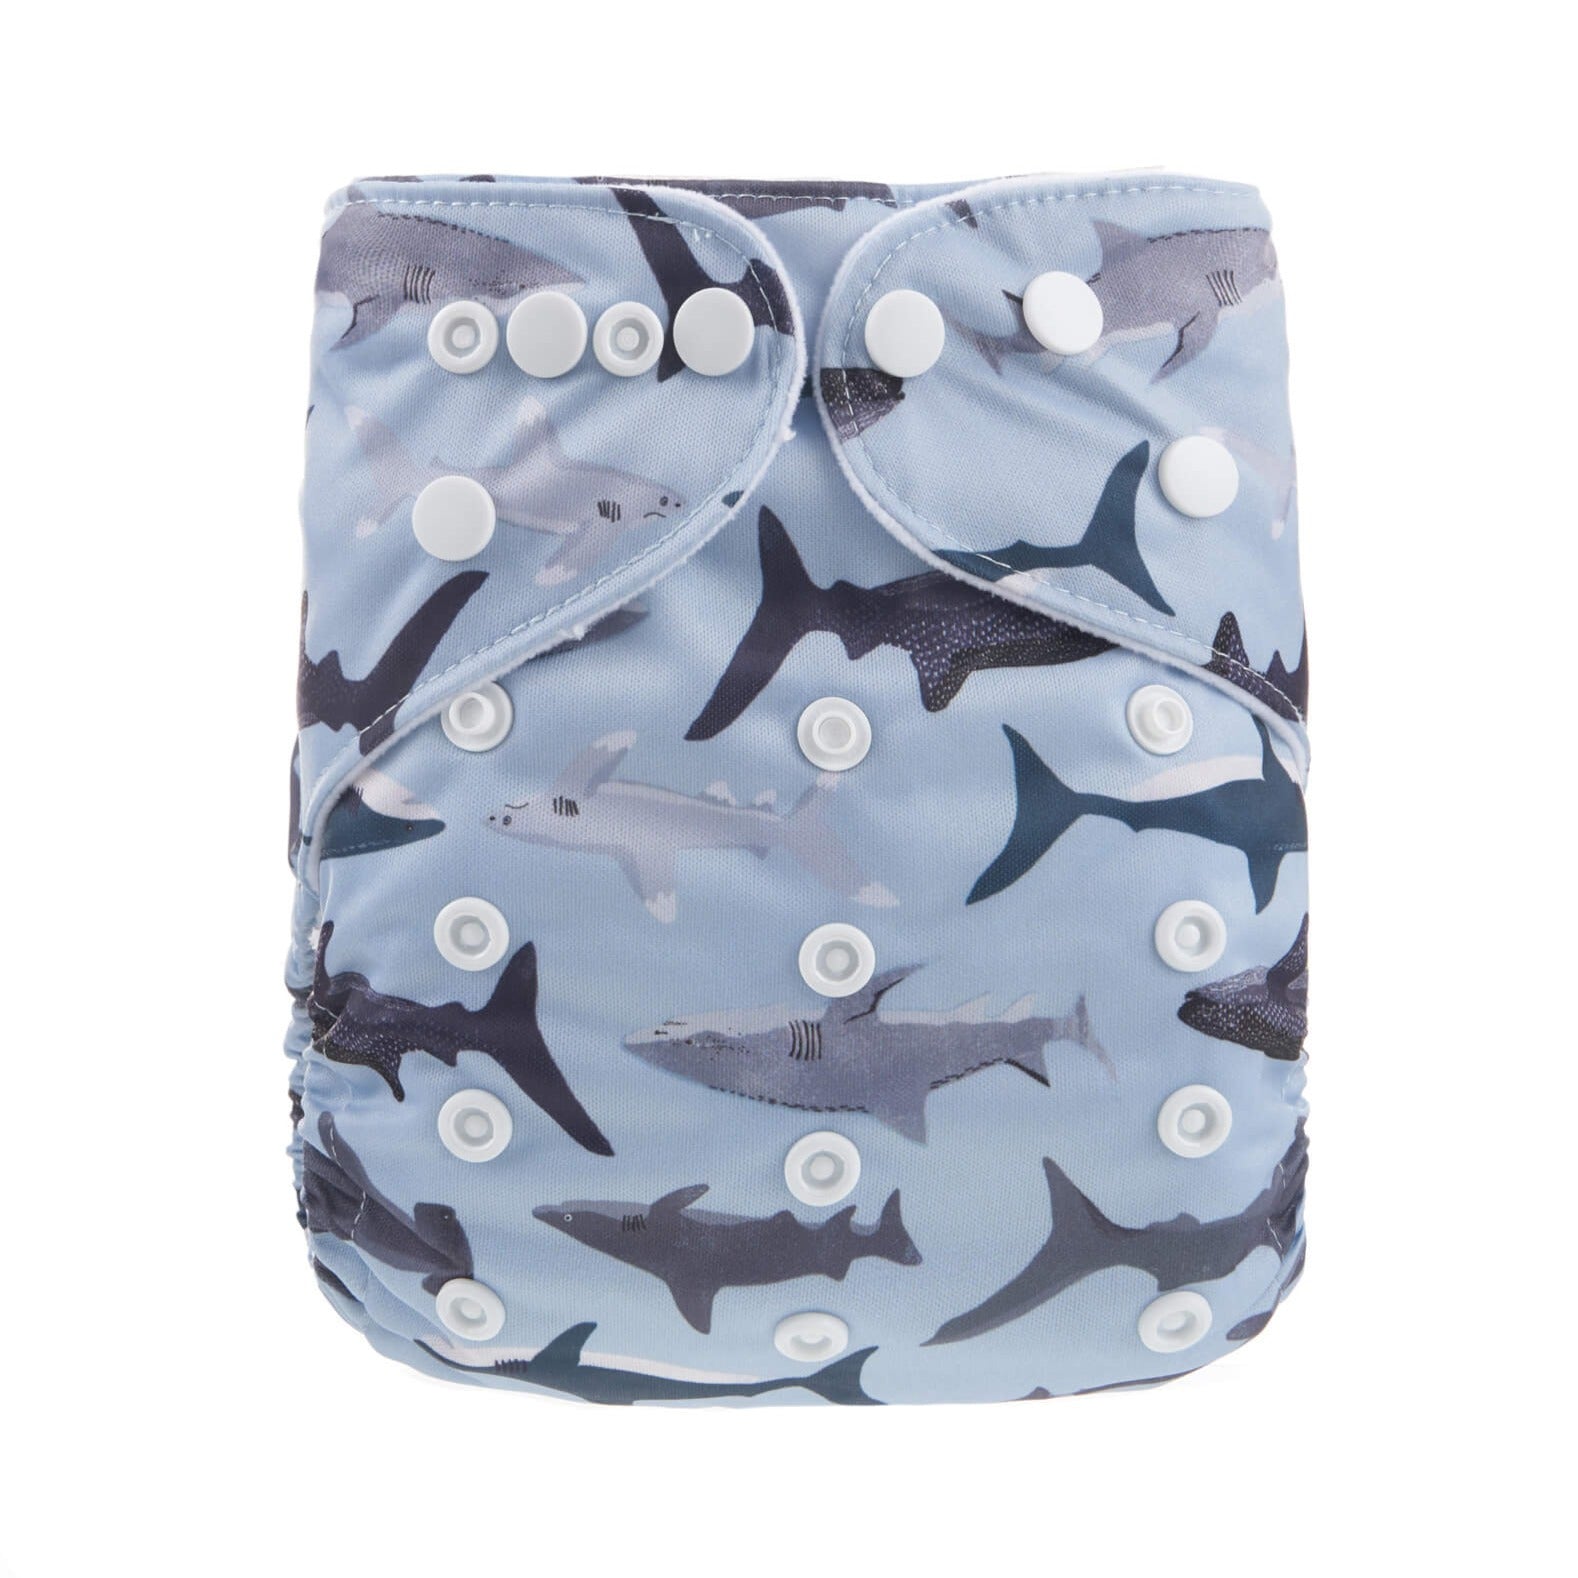 Sharks One Size Fits Most Reusable Cloth Nappy from Bear & Moo